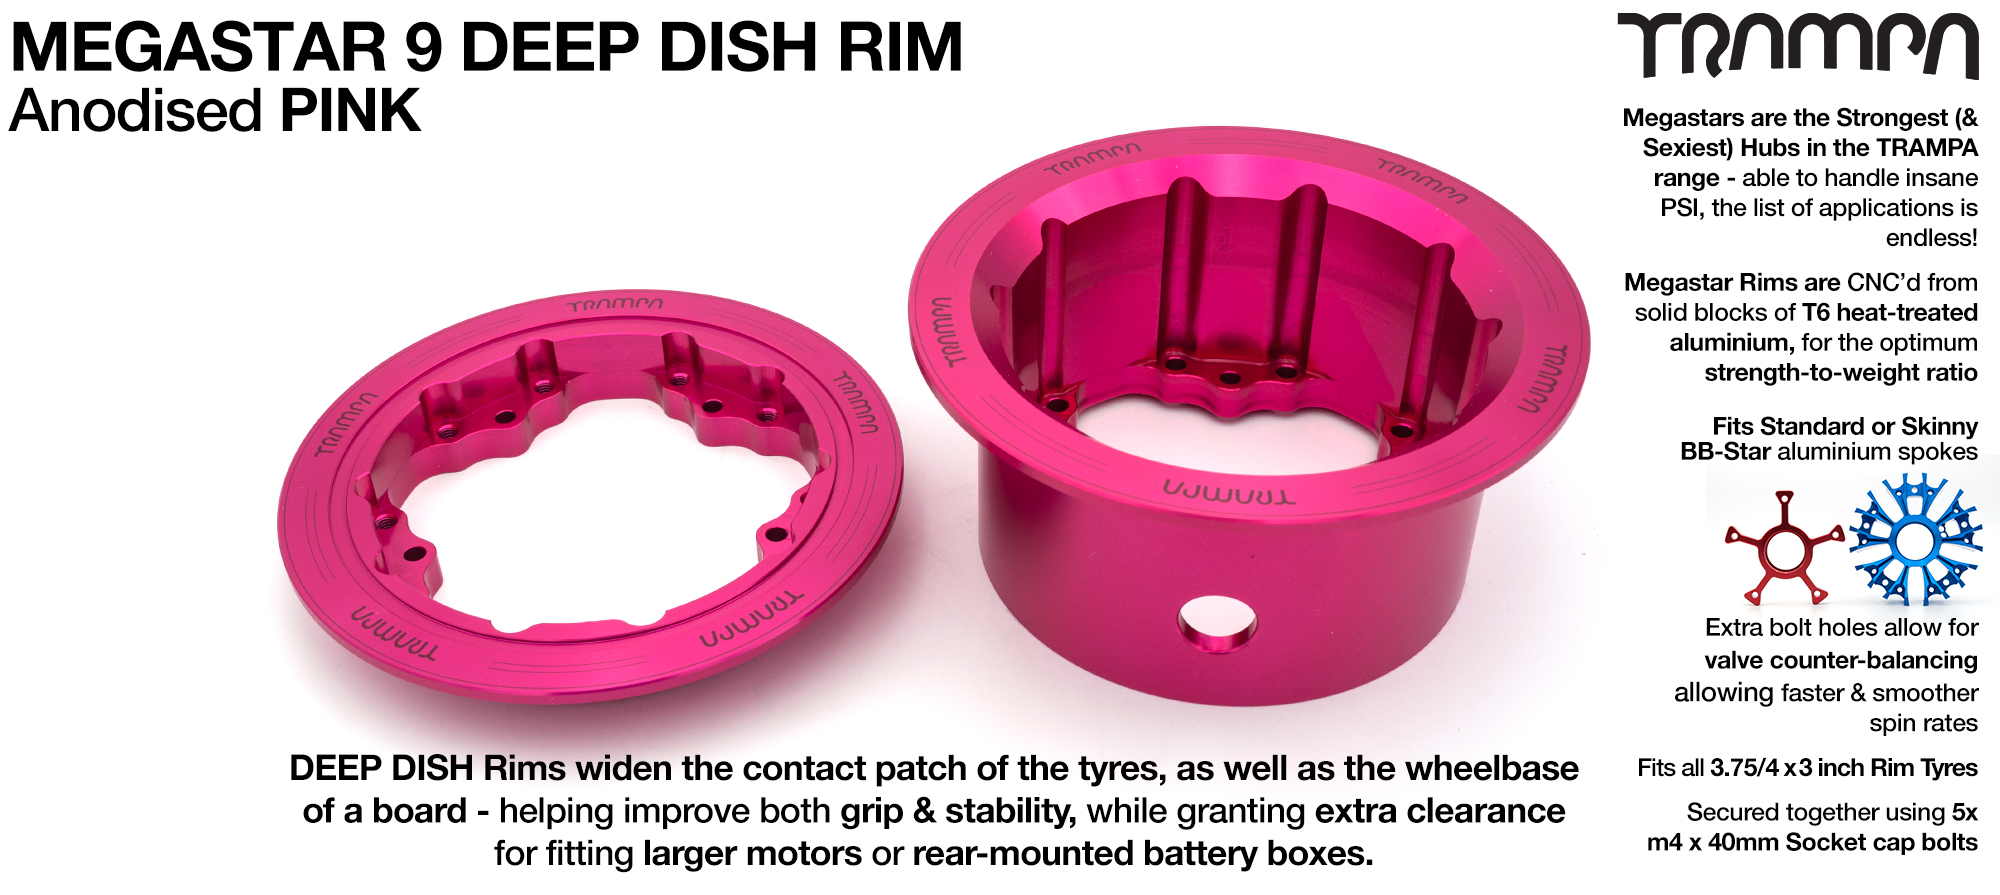 MEGASTAR 9 DD Rims Measure 3.75/4x 3 Inch. The Bearings are positioned DEEP-DISH OFF-SET & accept 3.75 & 4 Inch Rim Tyres - PINK